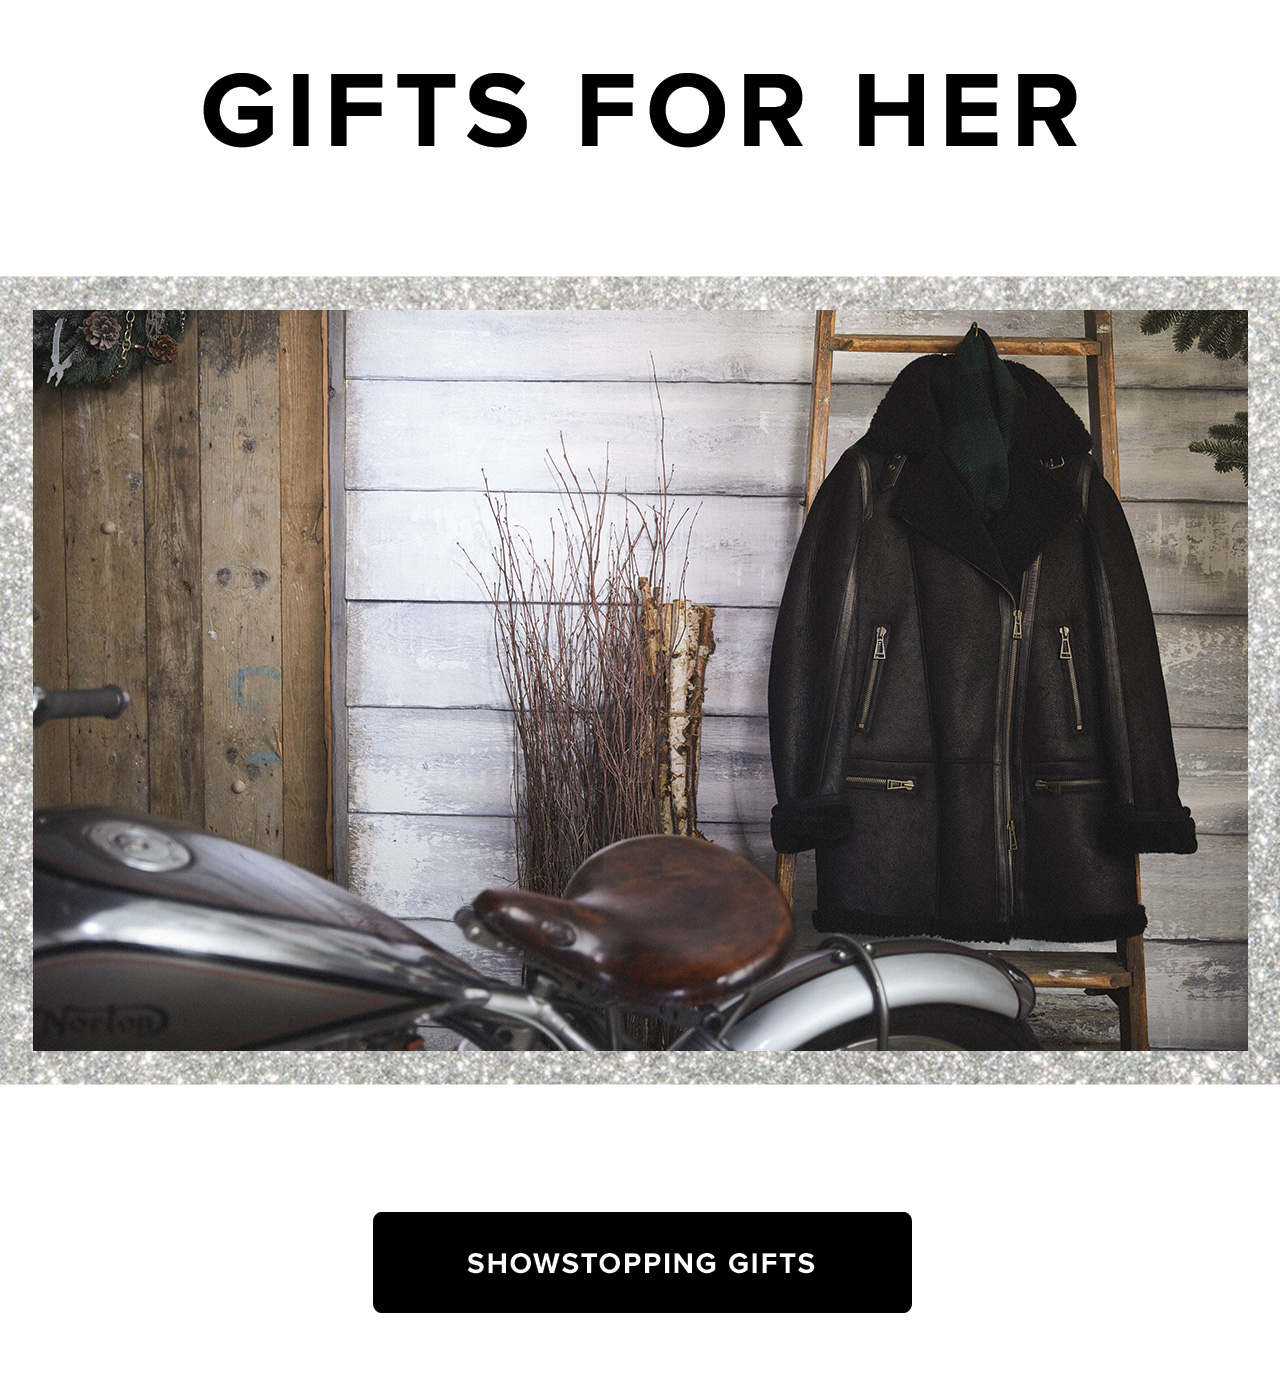 Showstopping Gifts